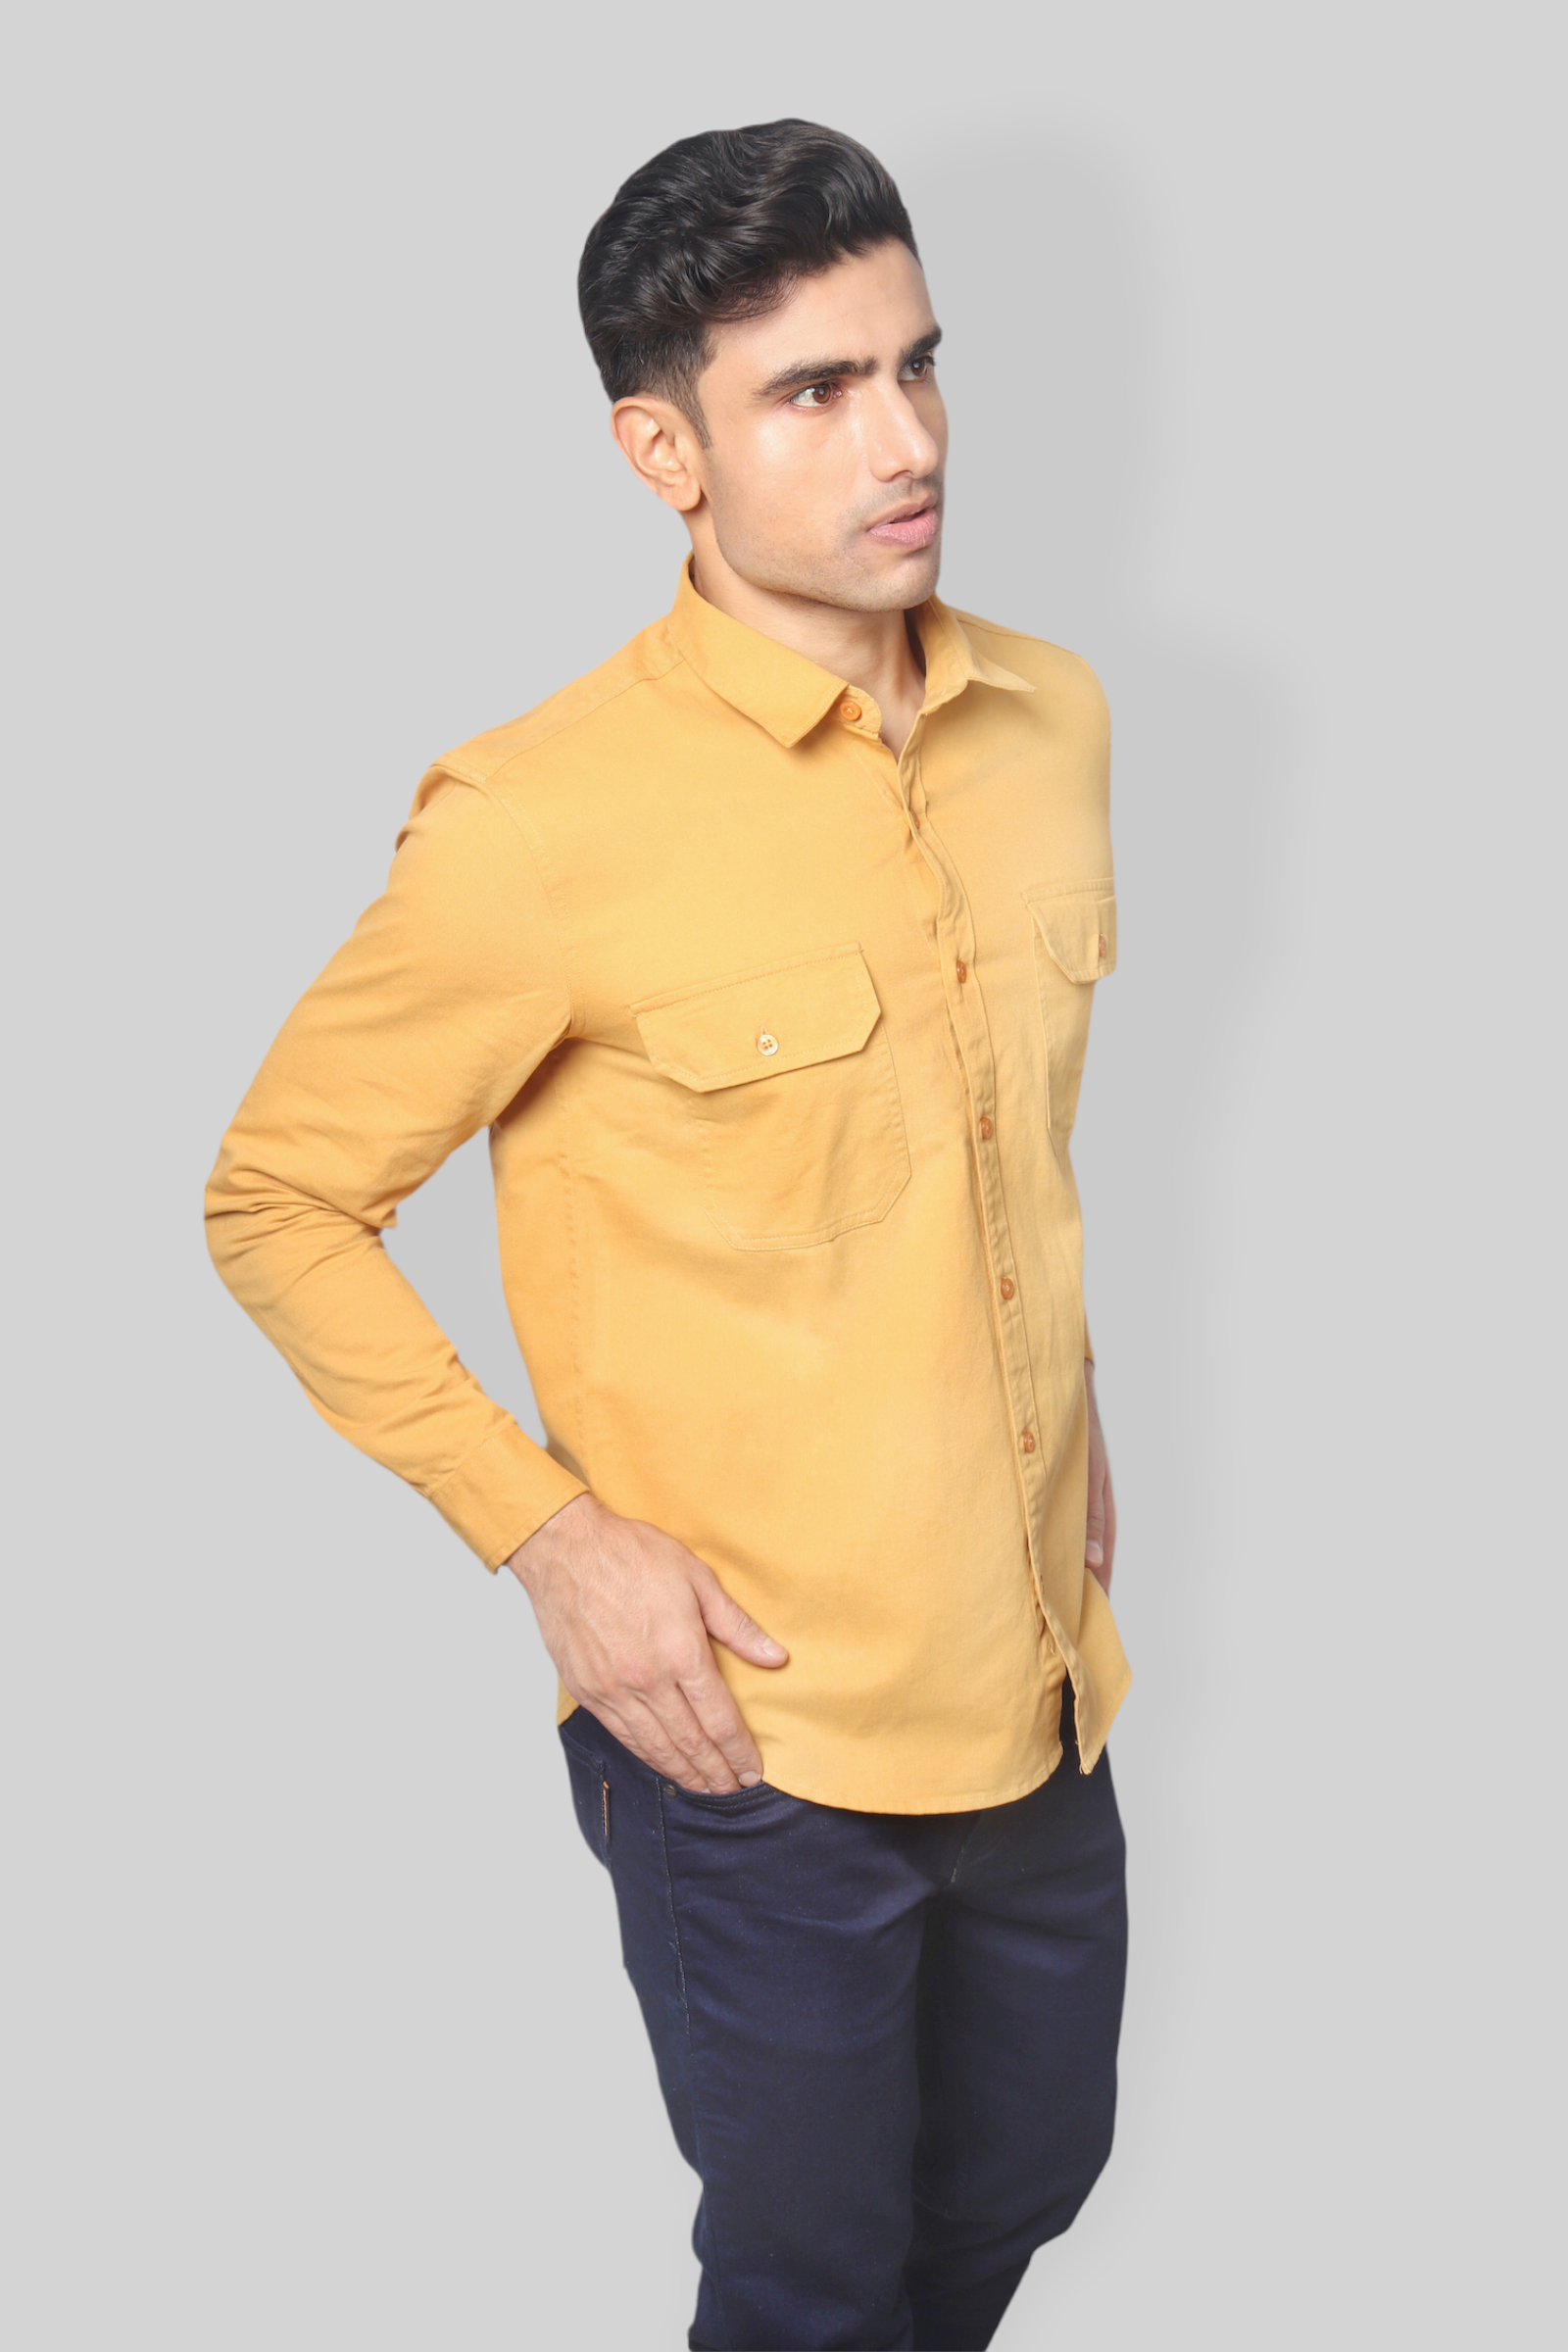 U.S. Polo Assn. Denim Co. Men Solid Casual Yellow Shirt - Buy U.S. Polo  Assn. Denim Co. Men Solid Casual Yellow Shirt Online at Best Prices in  India | Flipkart.com